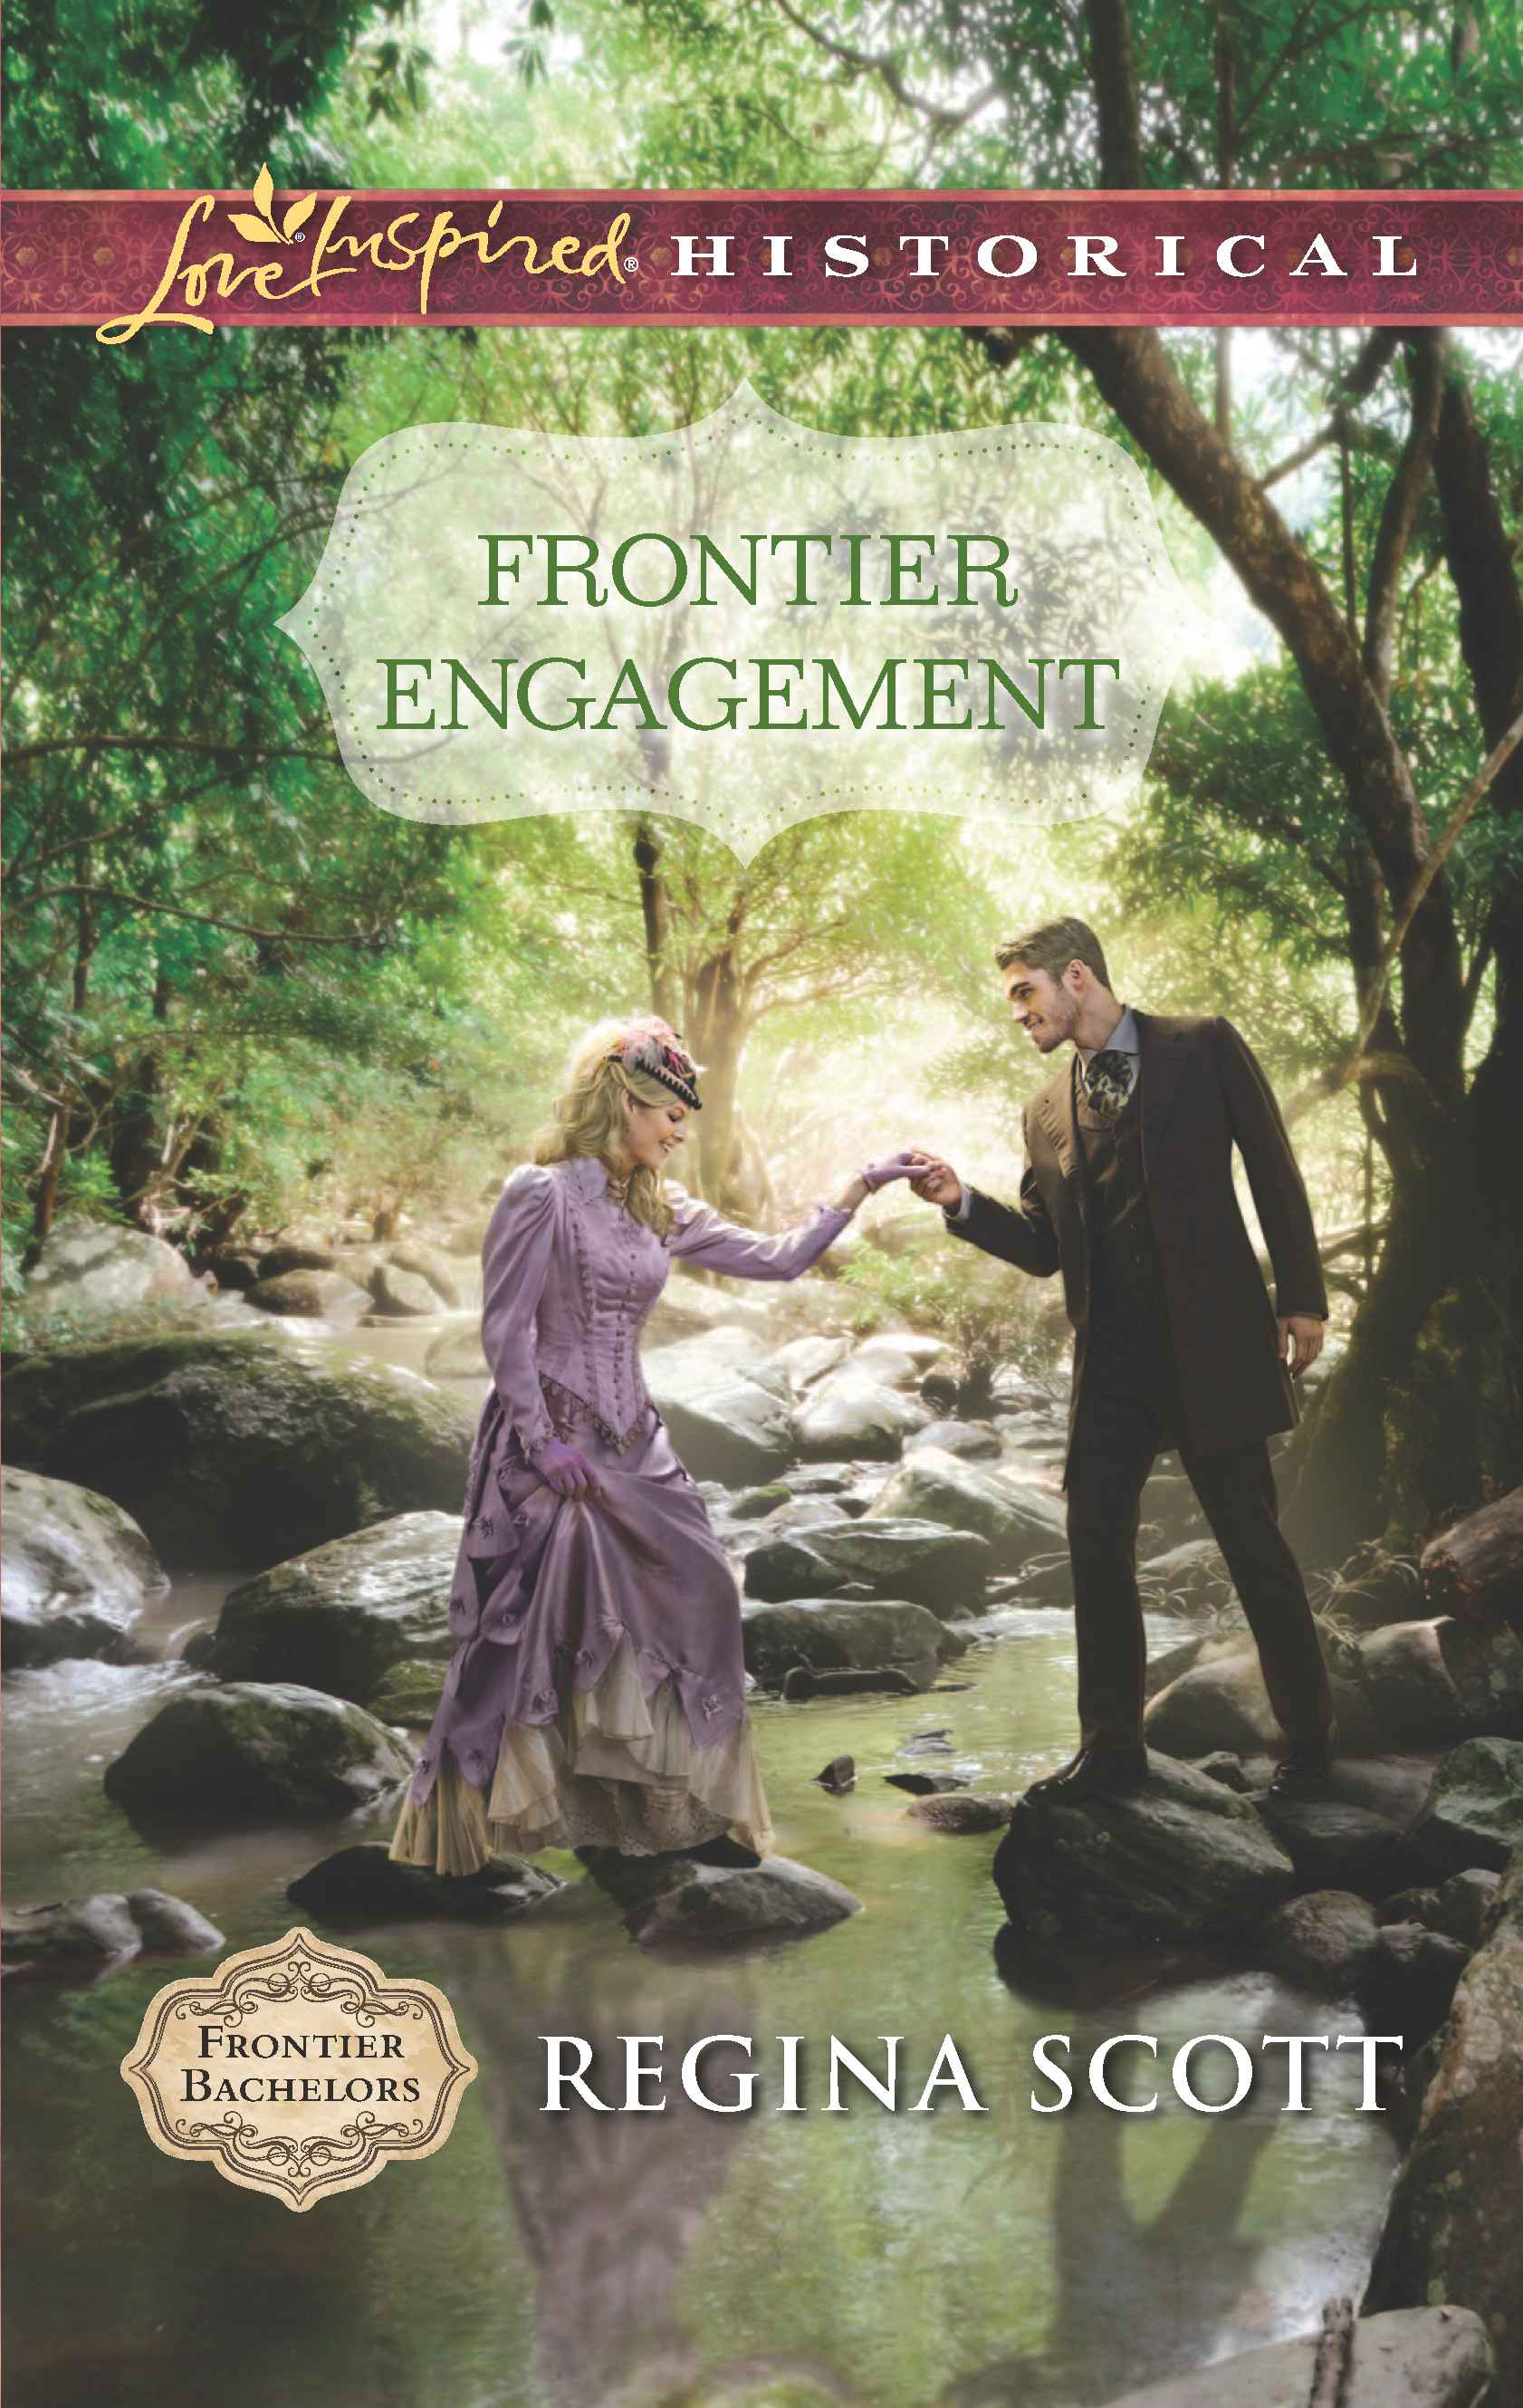 Frontier Engagement, book 3 in the Frontier Bachelors series by historical romance author Regina Scott